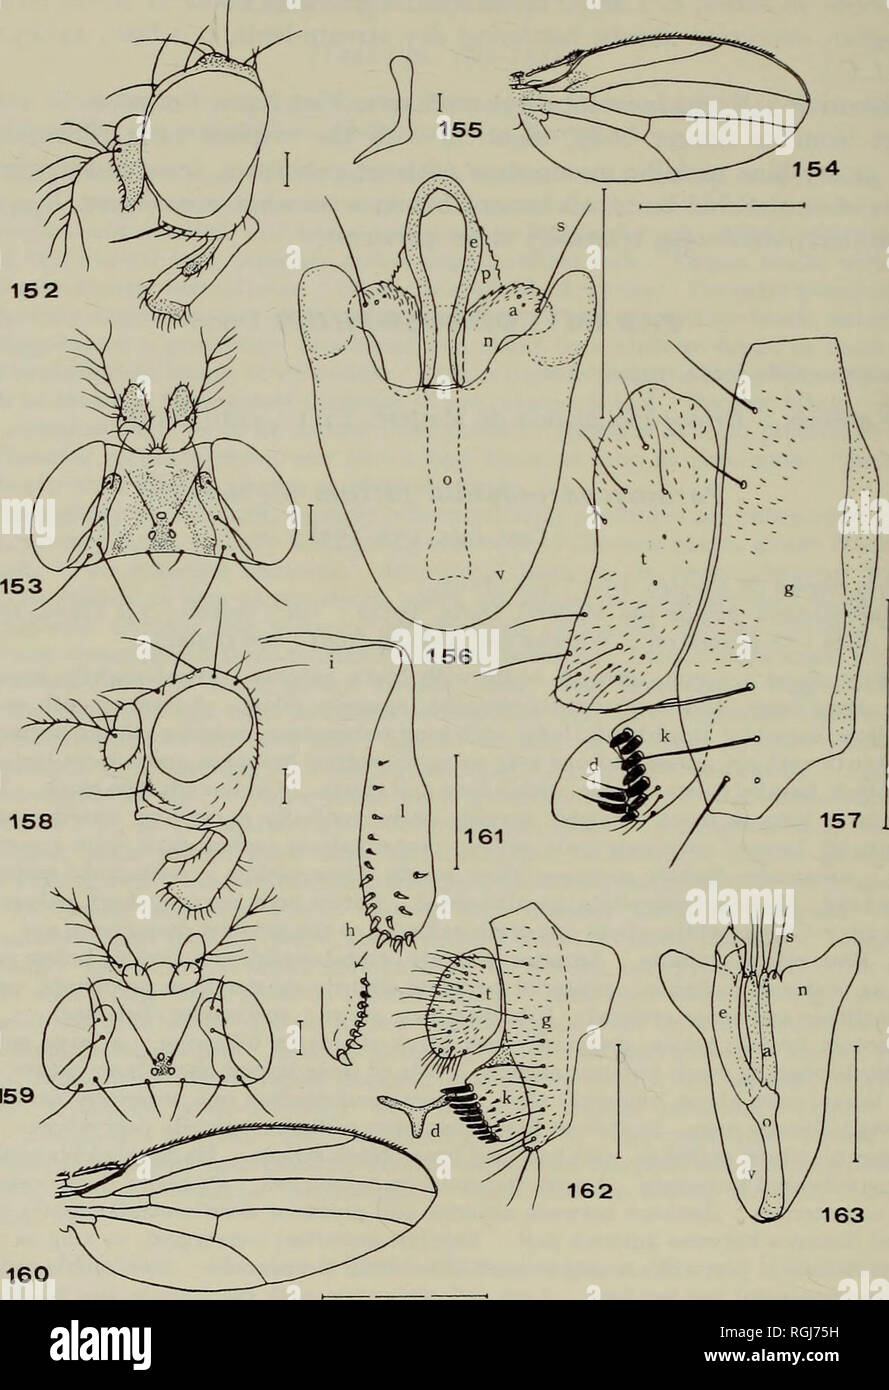 . Bulletin of the British Museum (Natural History) Entom Supp. 56 T. OKADA. 159 Figs. 152-163. 152-157, Paramycodrosophila pictula de Meijere, $. 152, head, lateral aspect ; 153, head, dorsal aspect ; 154, wing ; 155, ejaculatory apodeme ; 156, phallic organs, ventral aspect ; 157, periphallic organs, lateral aspect. 158-163, Chaetodrosophilella coei sp. n. 158, 0* head, lateral aspect ; 159, $ head, dorsal aspect ; 160, (J wing ; 161, 9 egg-guide ; 162, periphallic organs, lateral aspect ; 163, phallic organs, dorsal aspect.. Please note that these images are extracted from scanned page image Stock Photo